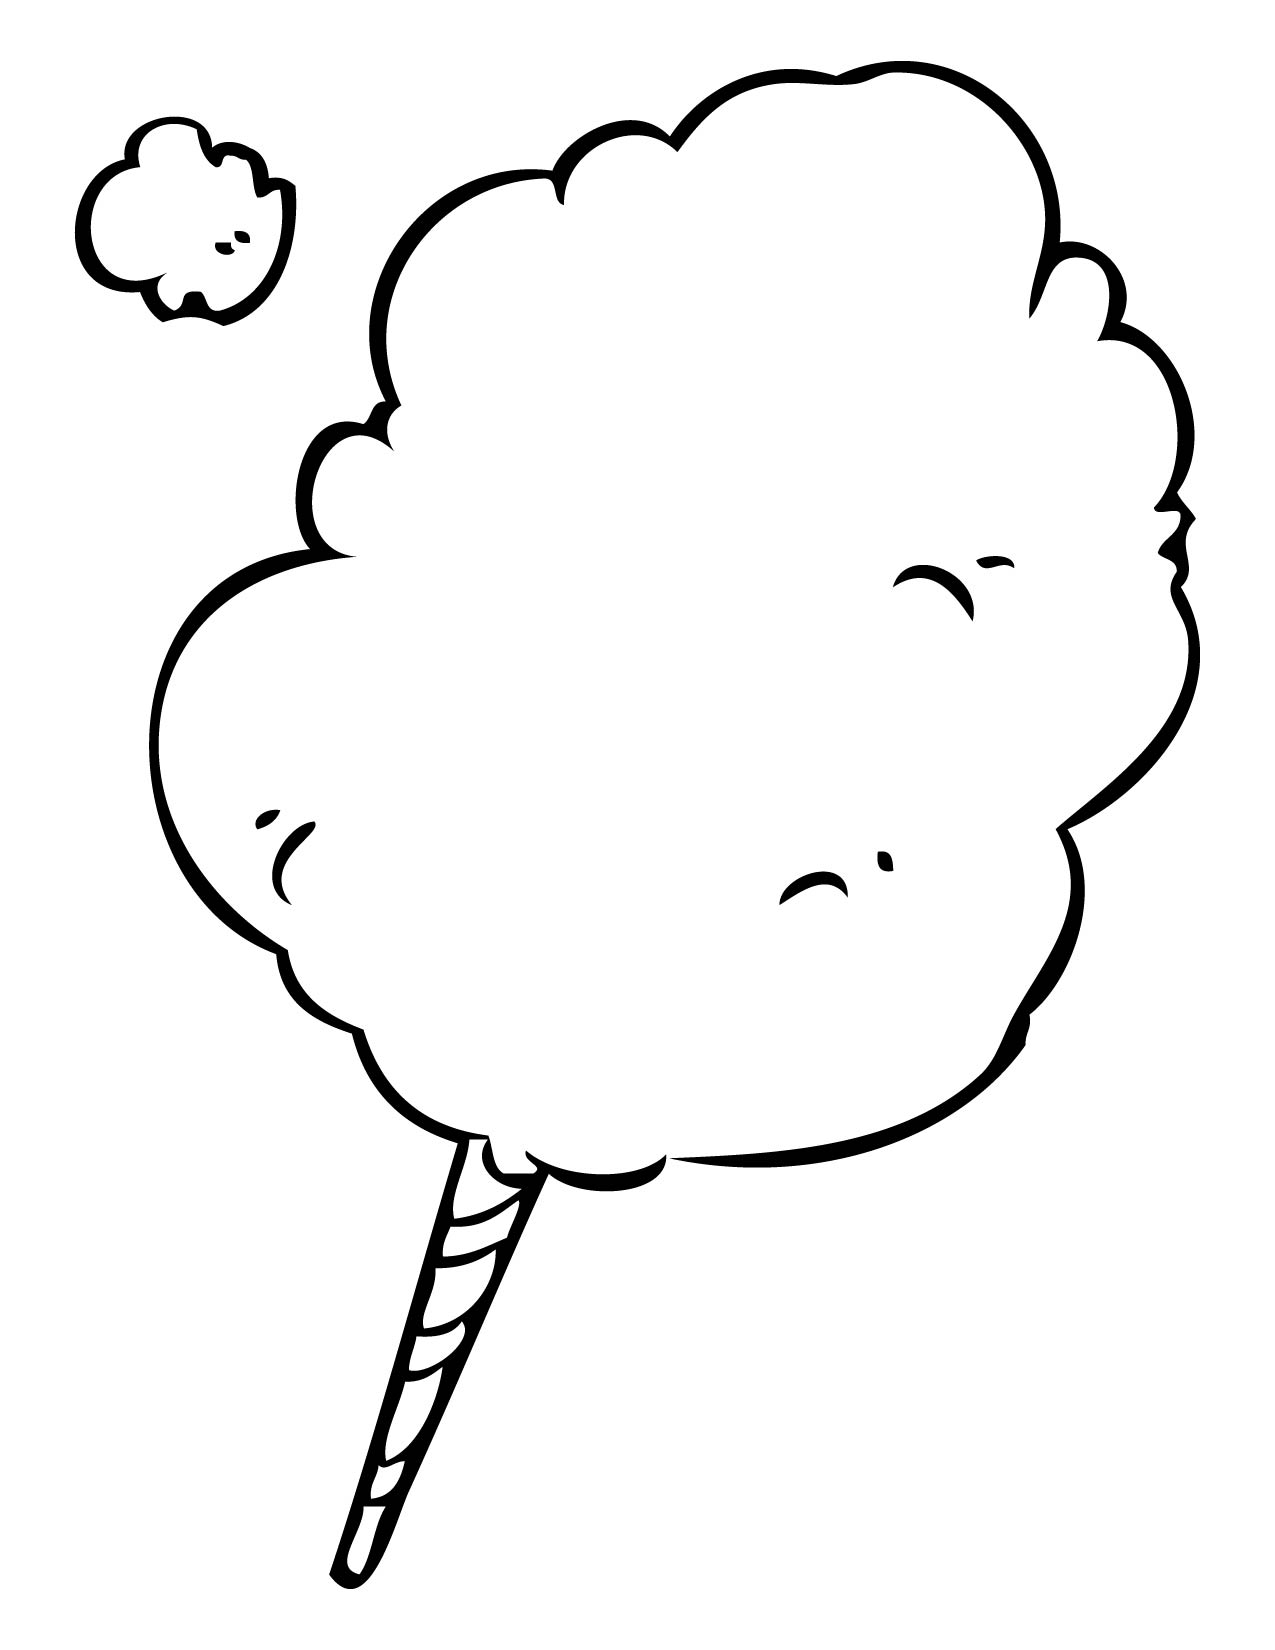 Cotton Candy Black And White Hd Photo Clipart